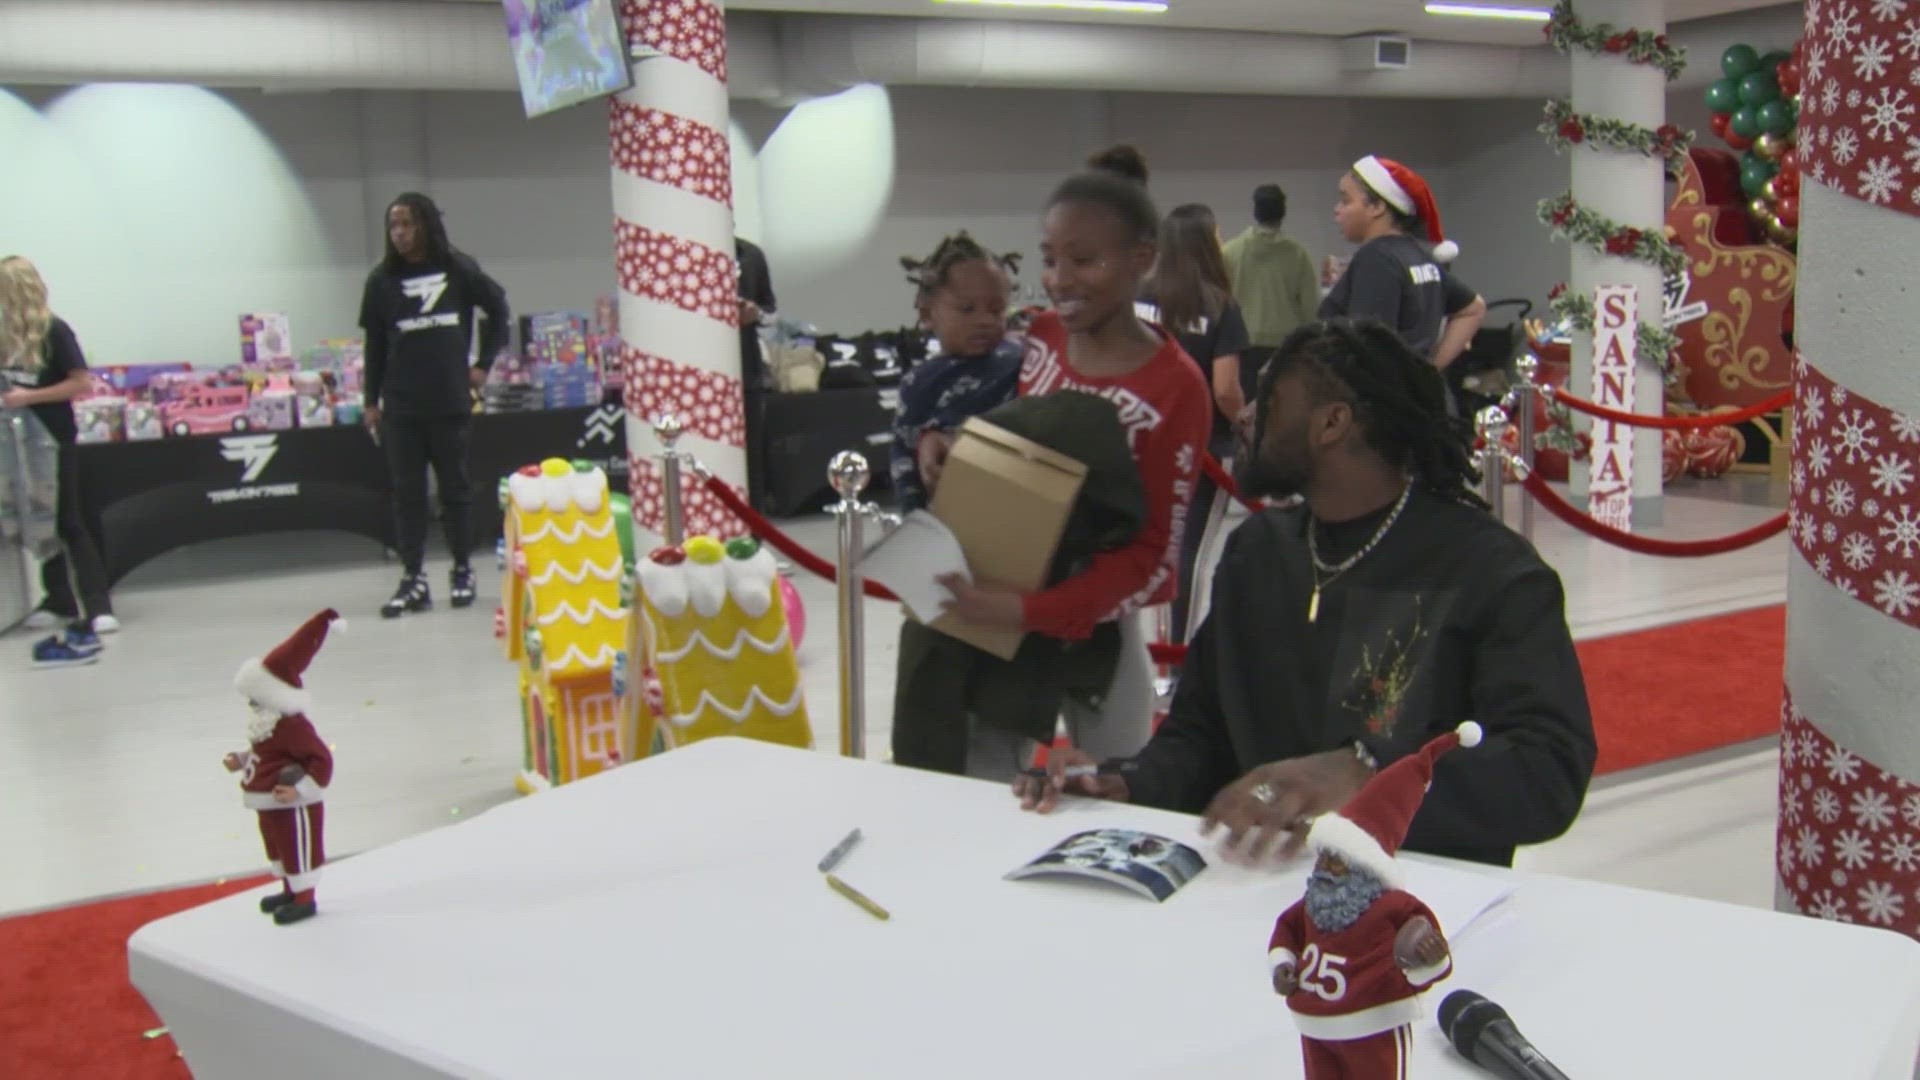 More than 50 children left Thursday's event with Christmas gifts, fresh haircuts, and the all-pro's autograph.